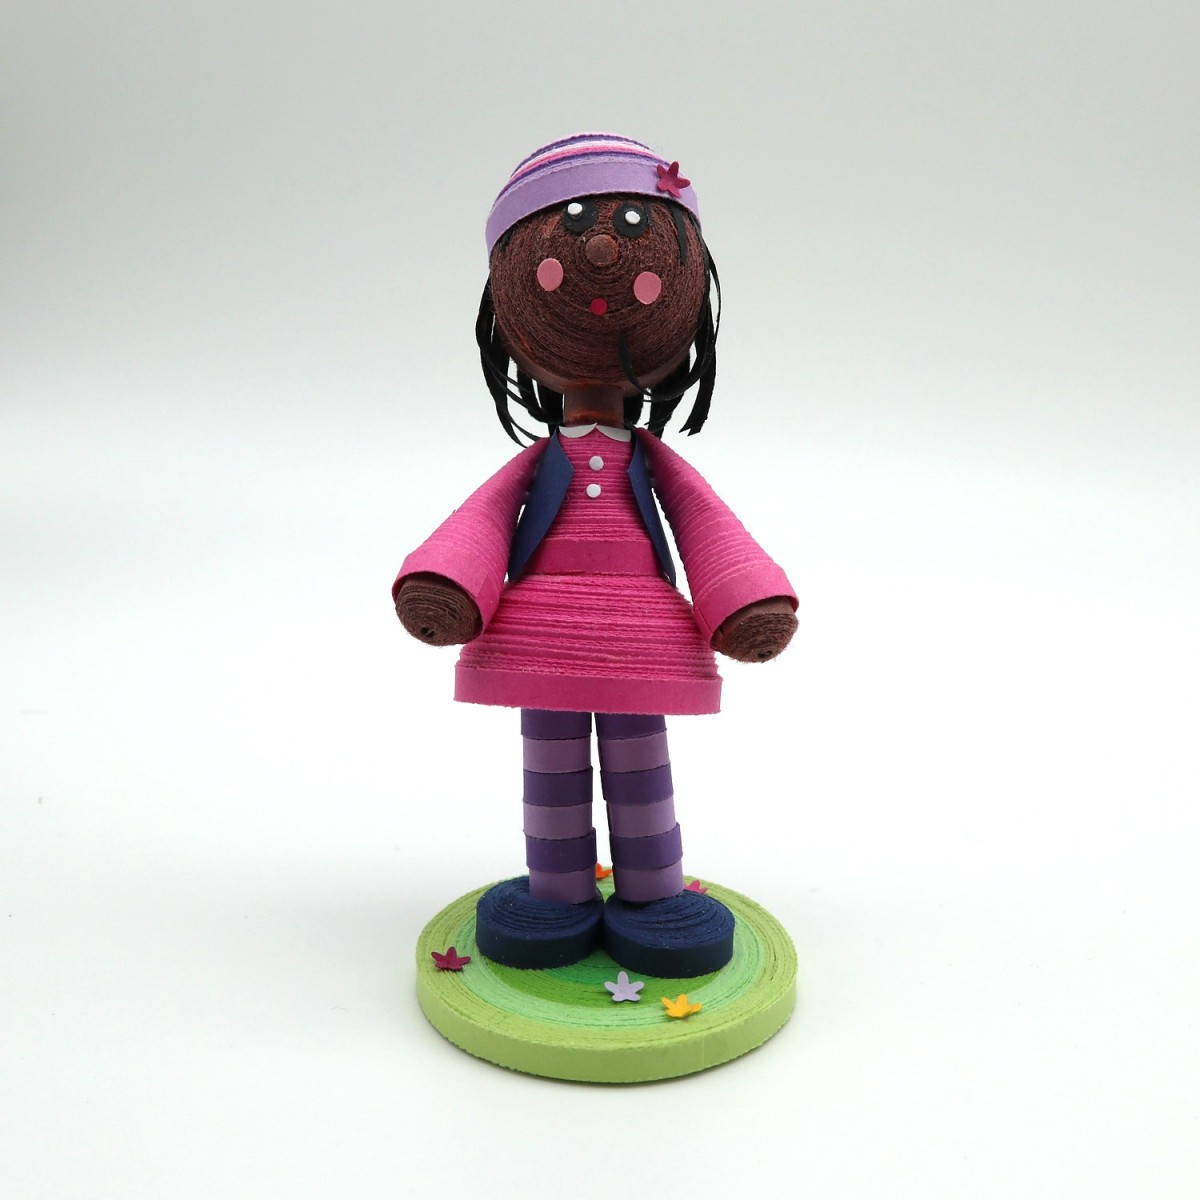 robuschi personnage quilling 2021-11-12